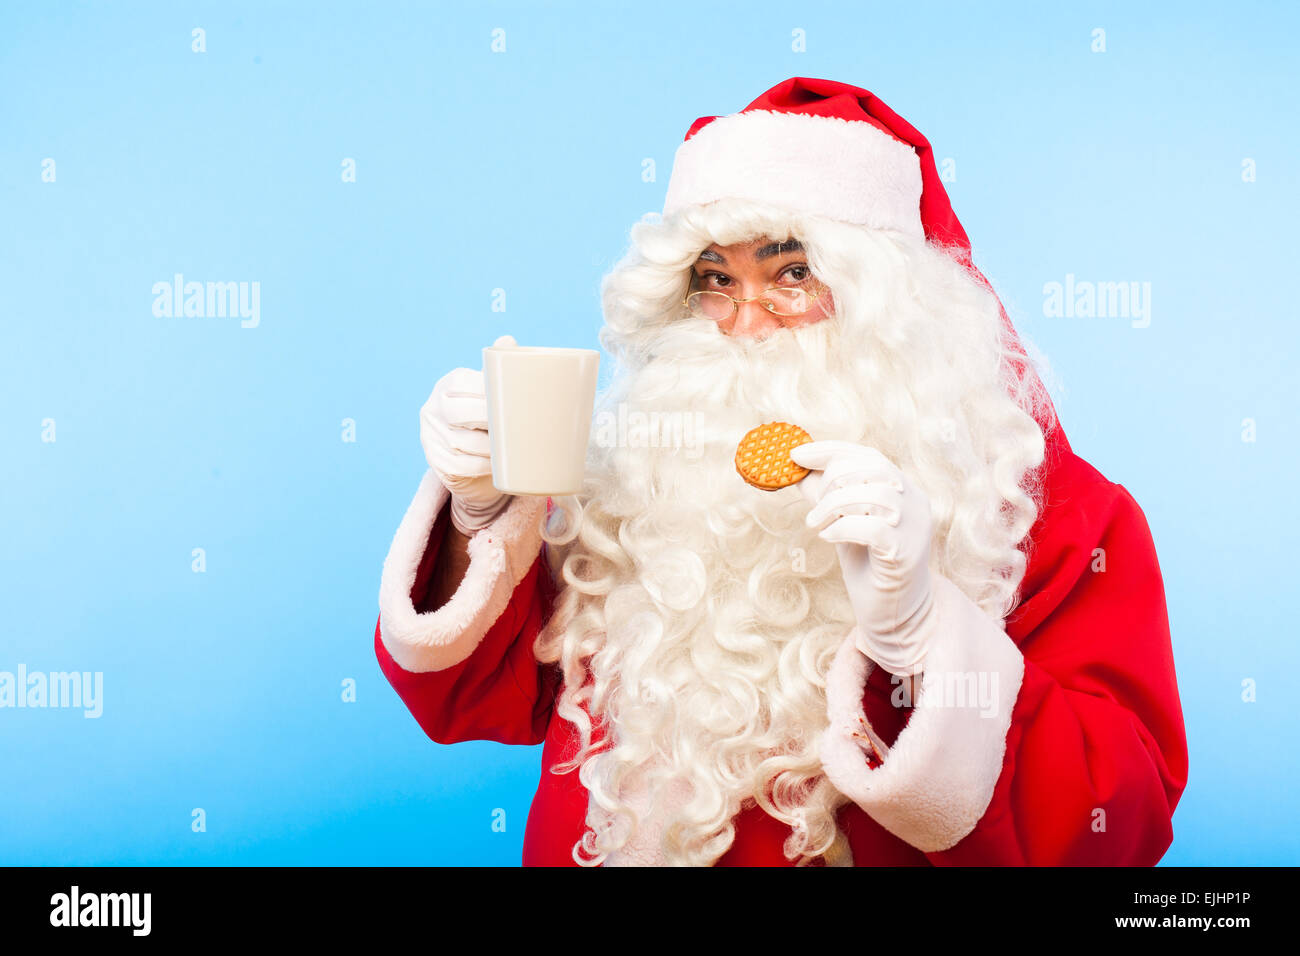 happy santa looking at camera with a cup of coffee and biscuit in hand, on blue background Stock Photo